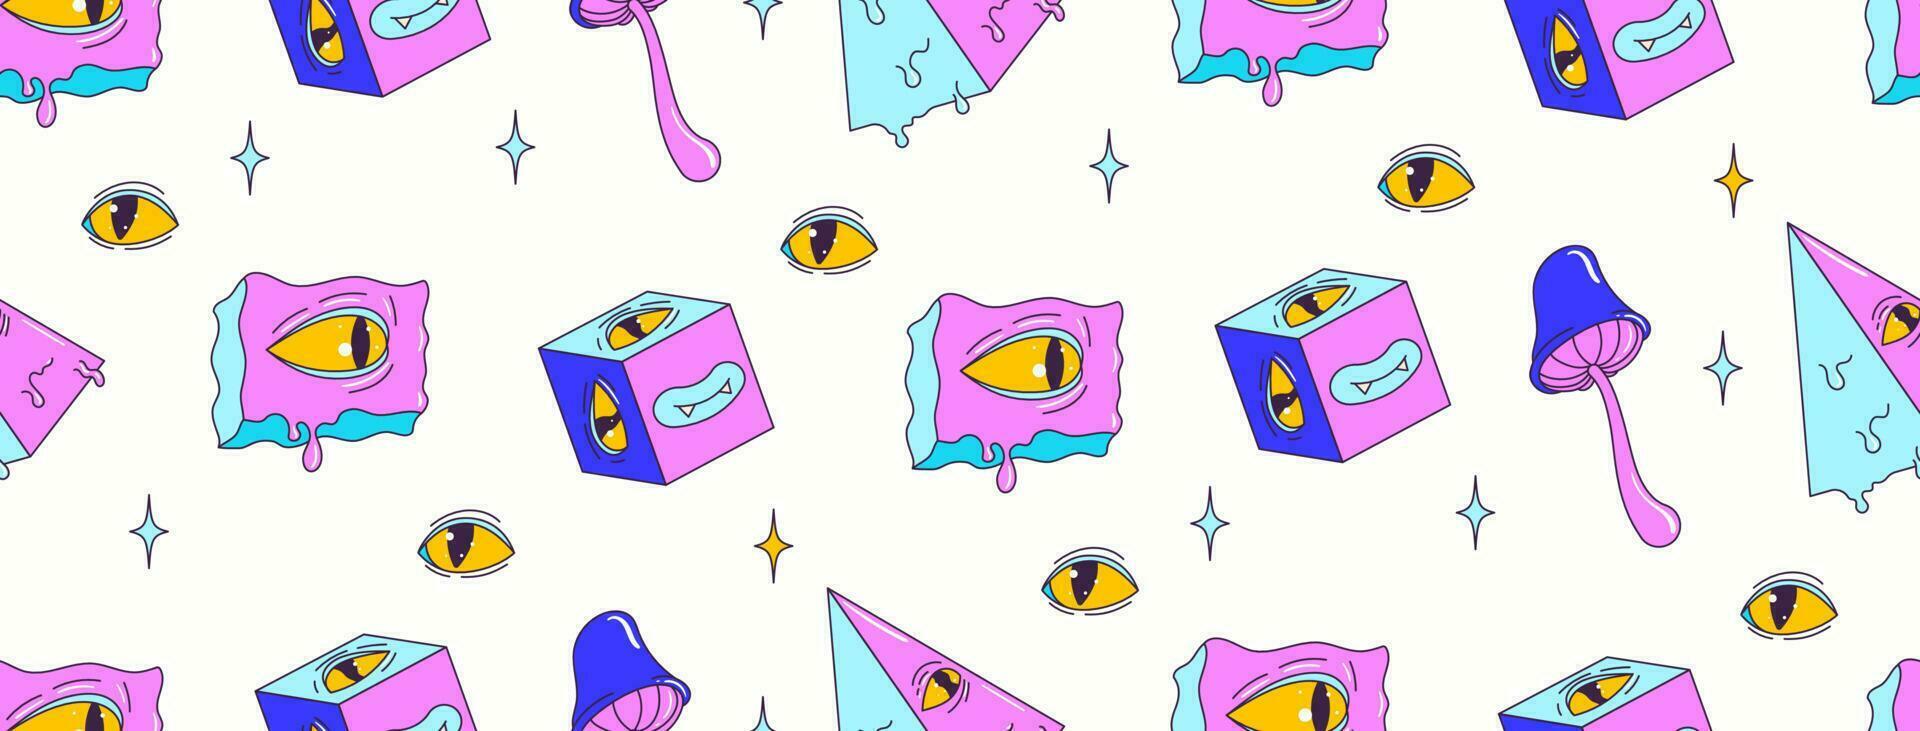 Psychedelic seamless pattern with weird cartoon character and elements. Trippy eye, mushroom, cube, pyramid. Contemporary trendy vector illustration.